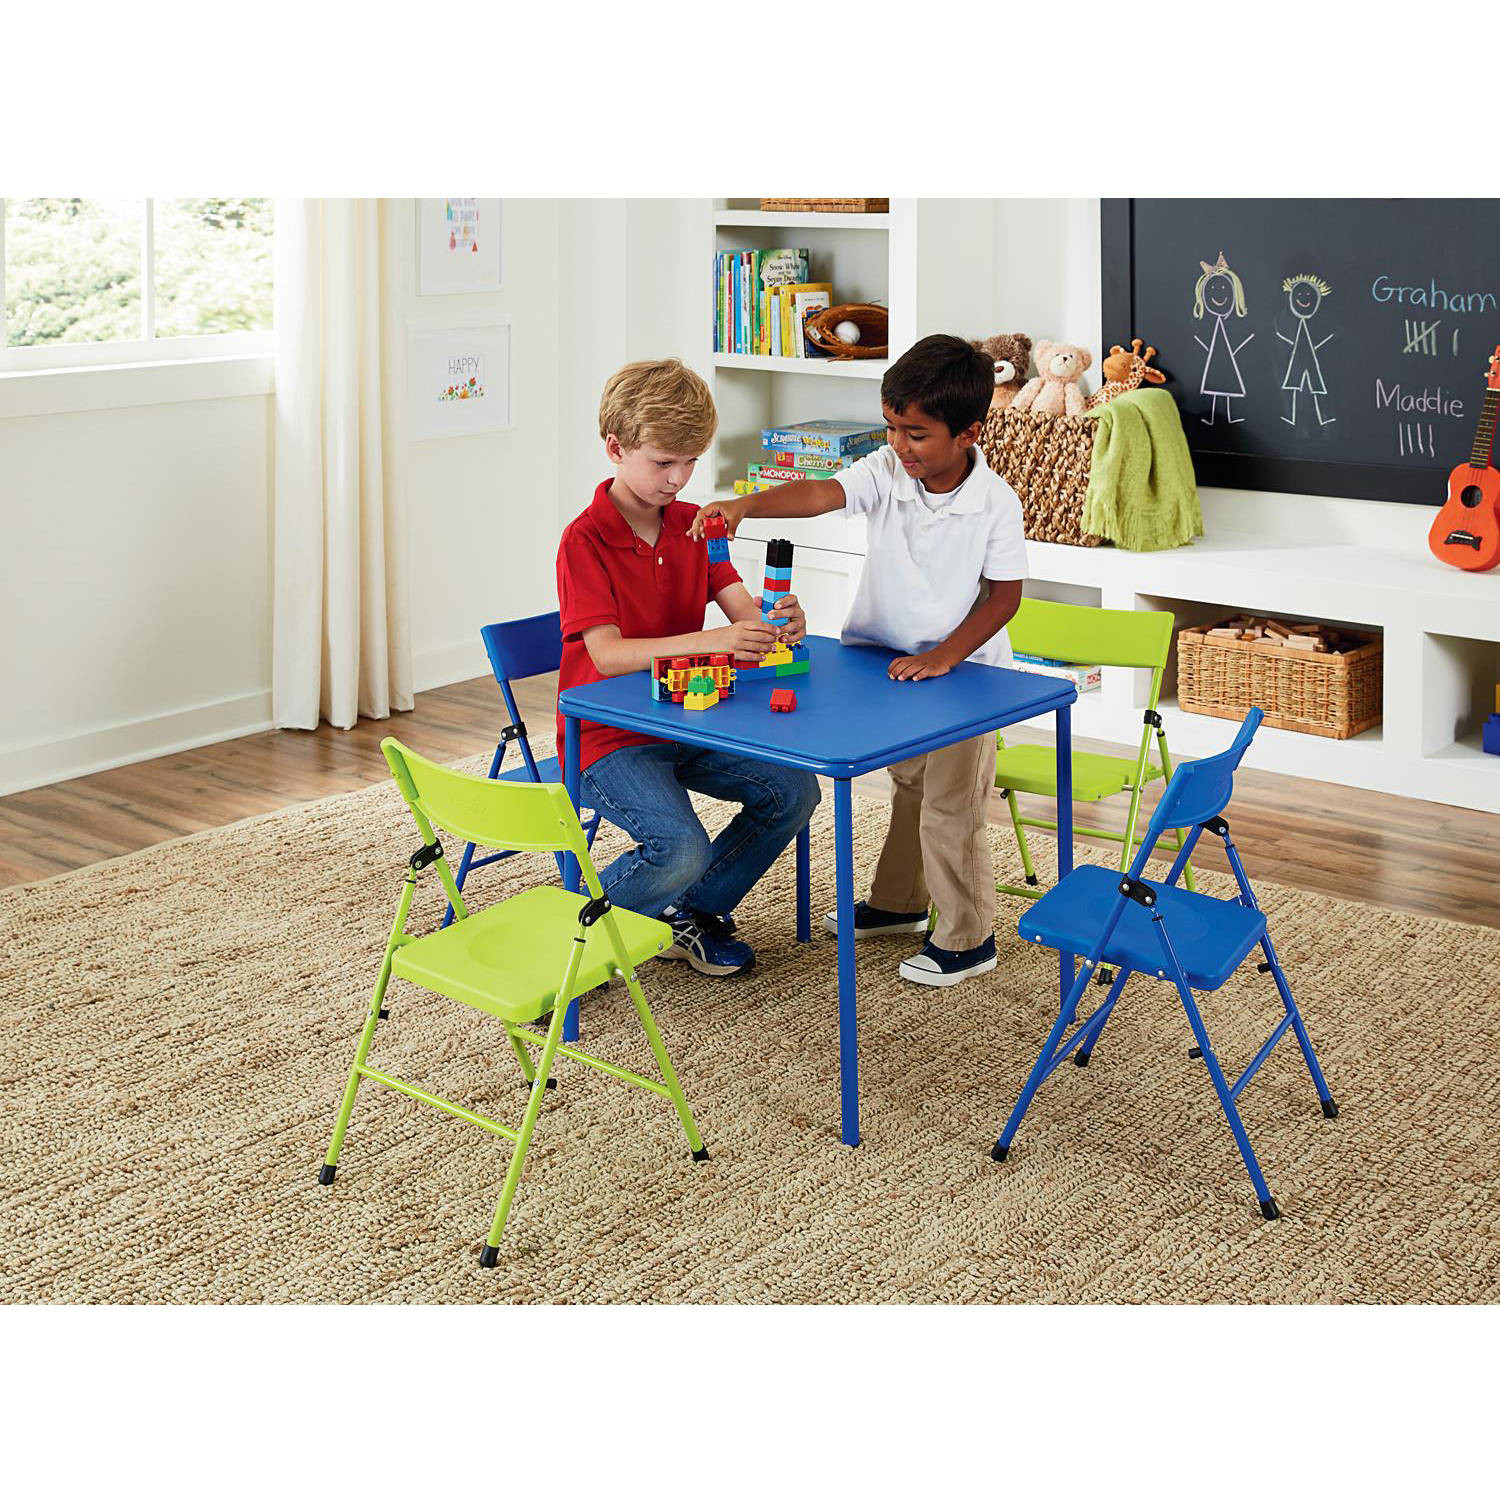 Walmart Kids Table Set
 Cosco 5 Piece Kid s Table and Chair Set Multiple Colors